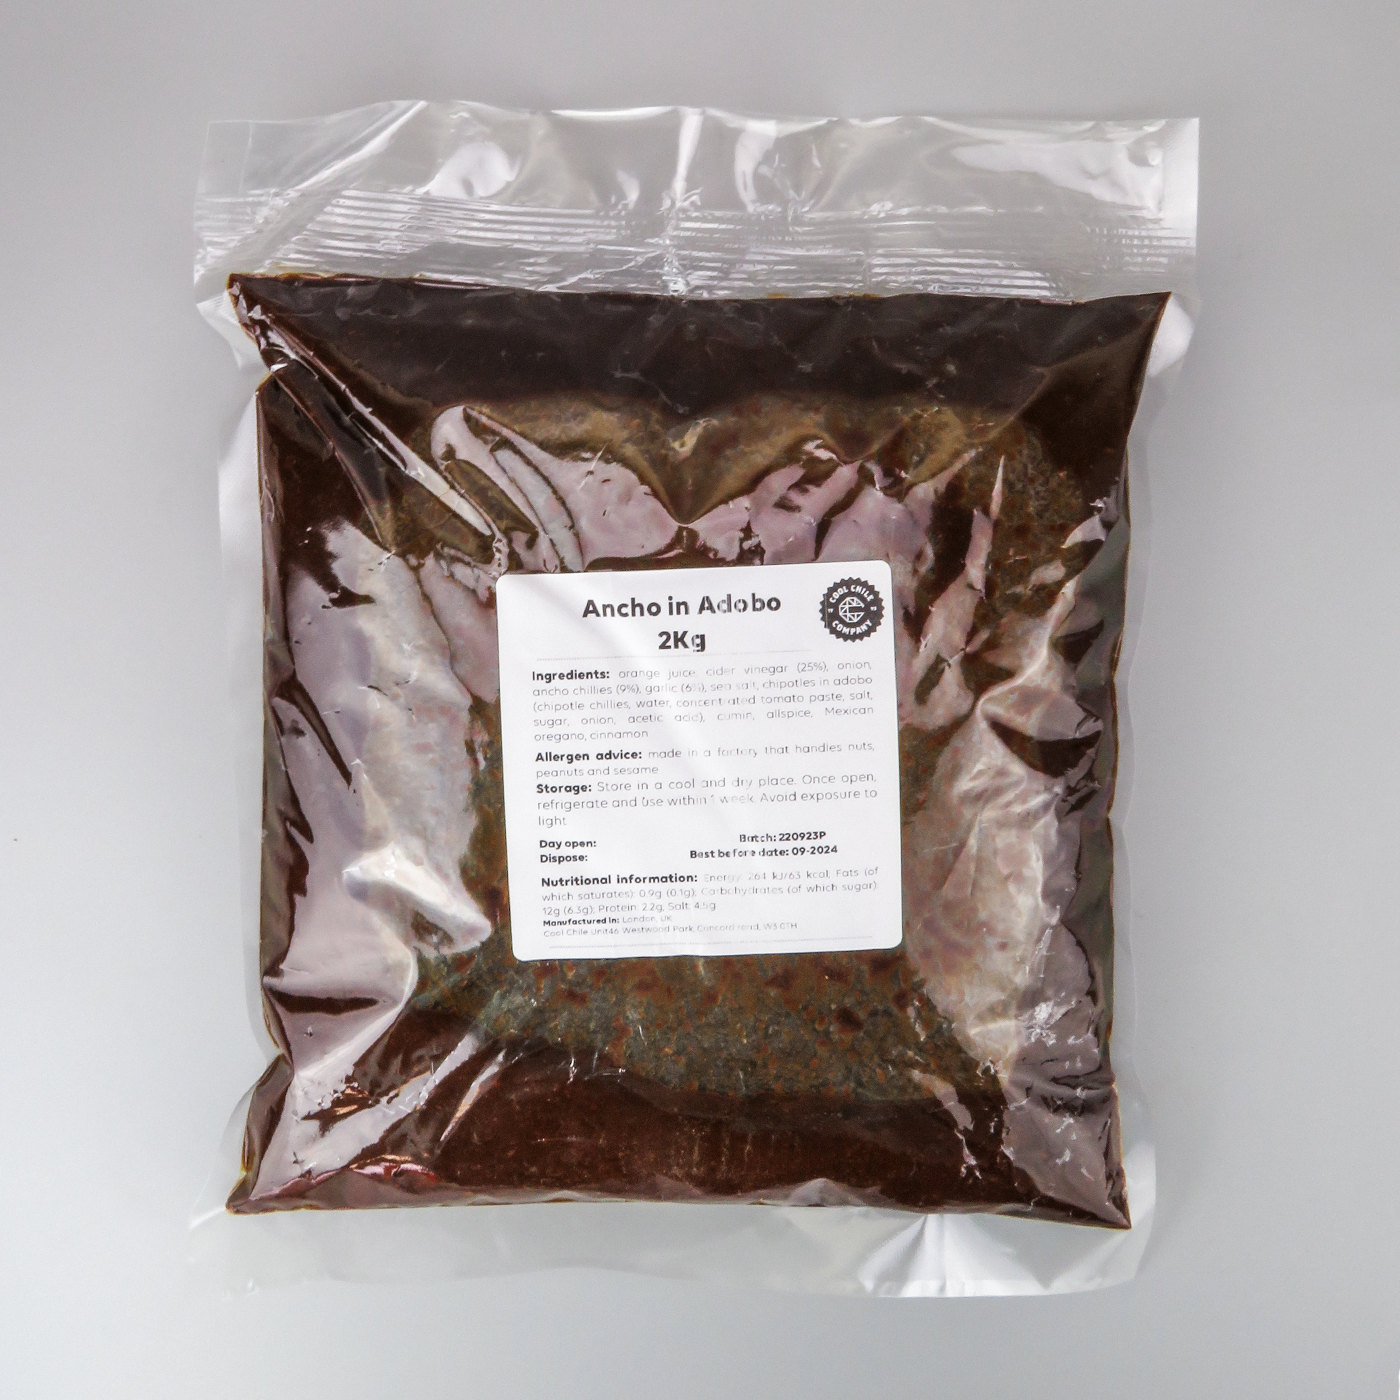 Ancho in Adobo - product image